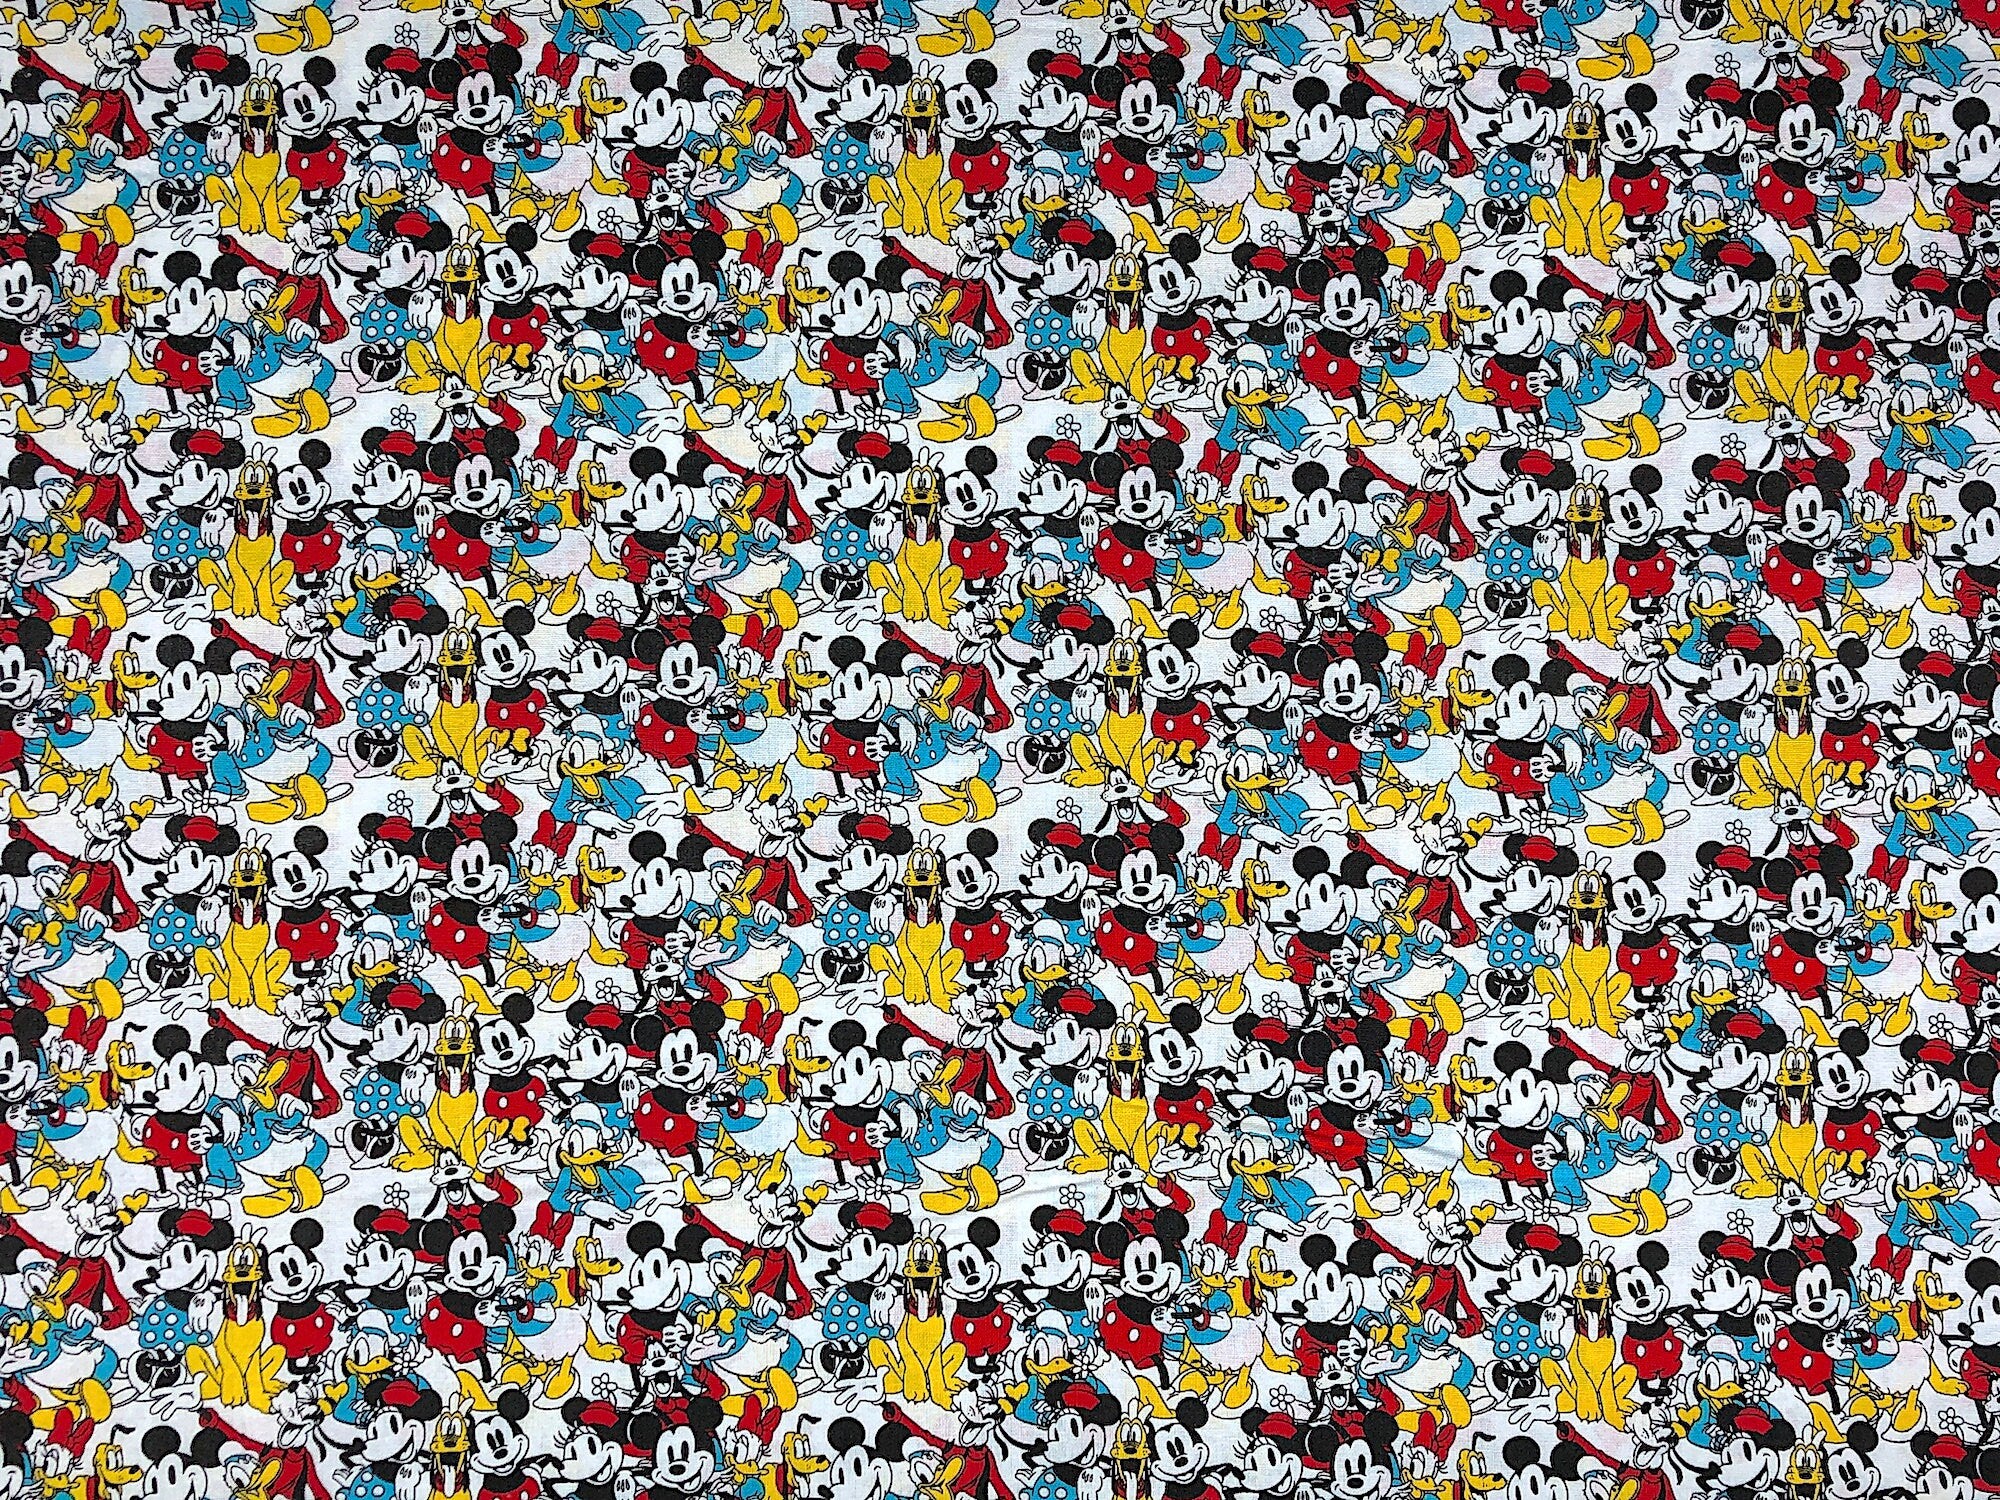 This fabric is called Sensational 6 Snapshot. This white fabric is covered with Mickey Mouse, Minnie Mouse, Pluto, Goofy and Donald Duck.